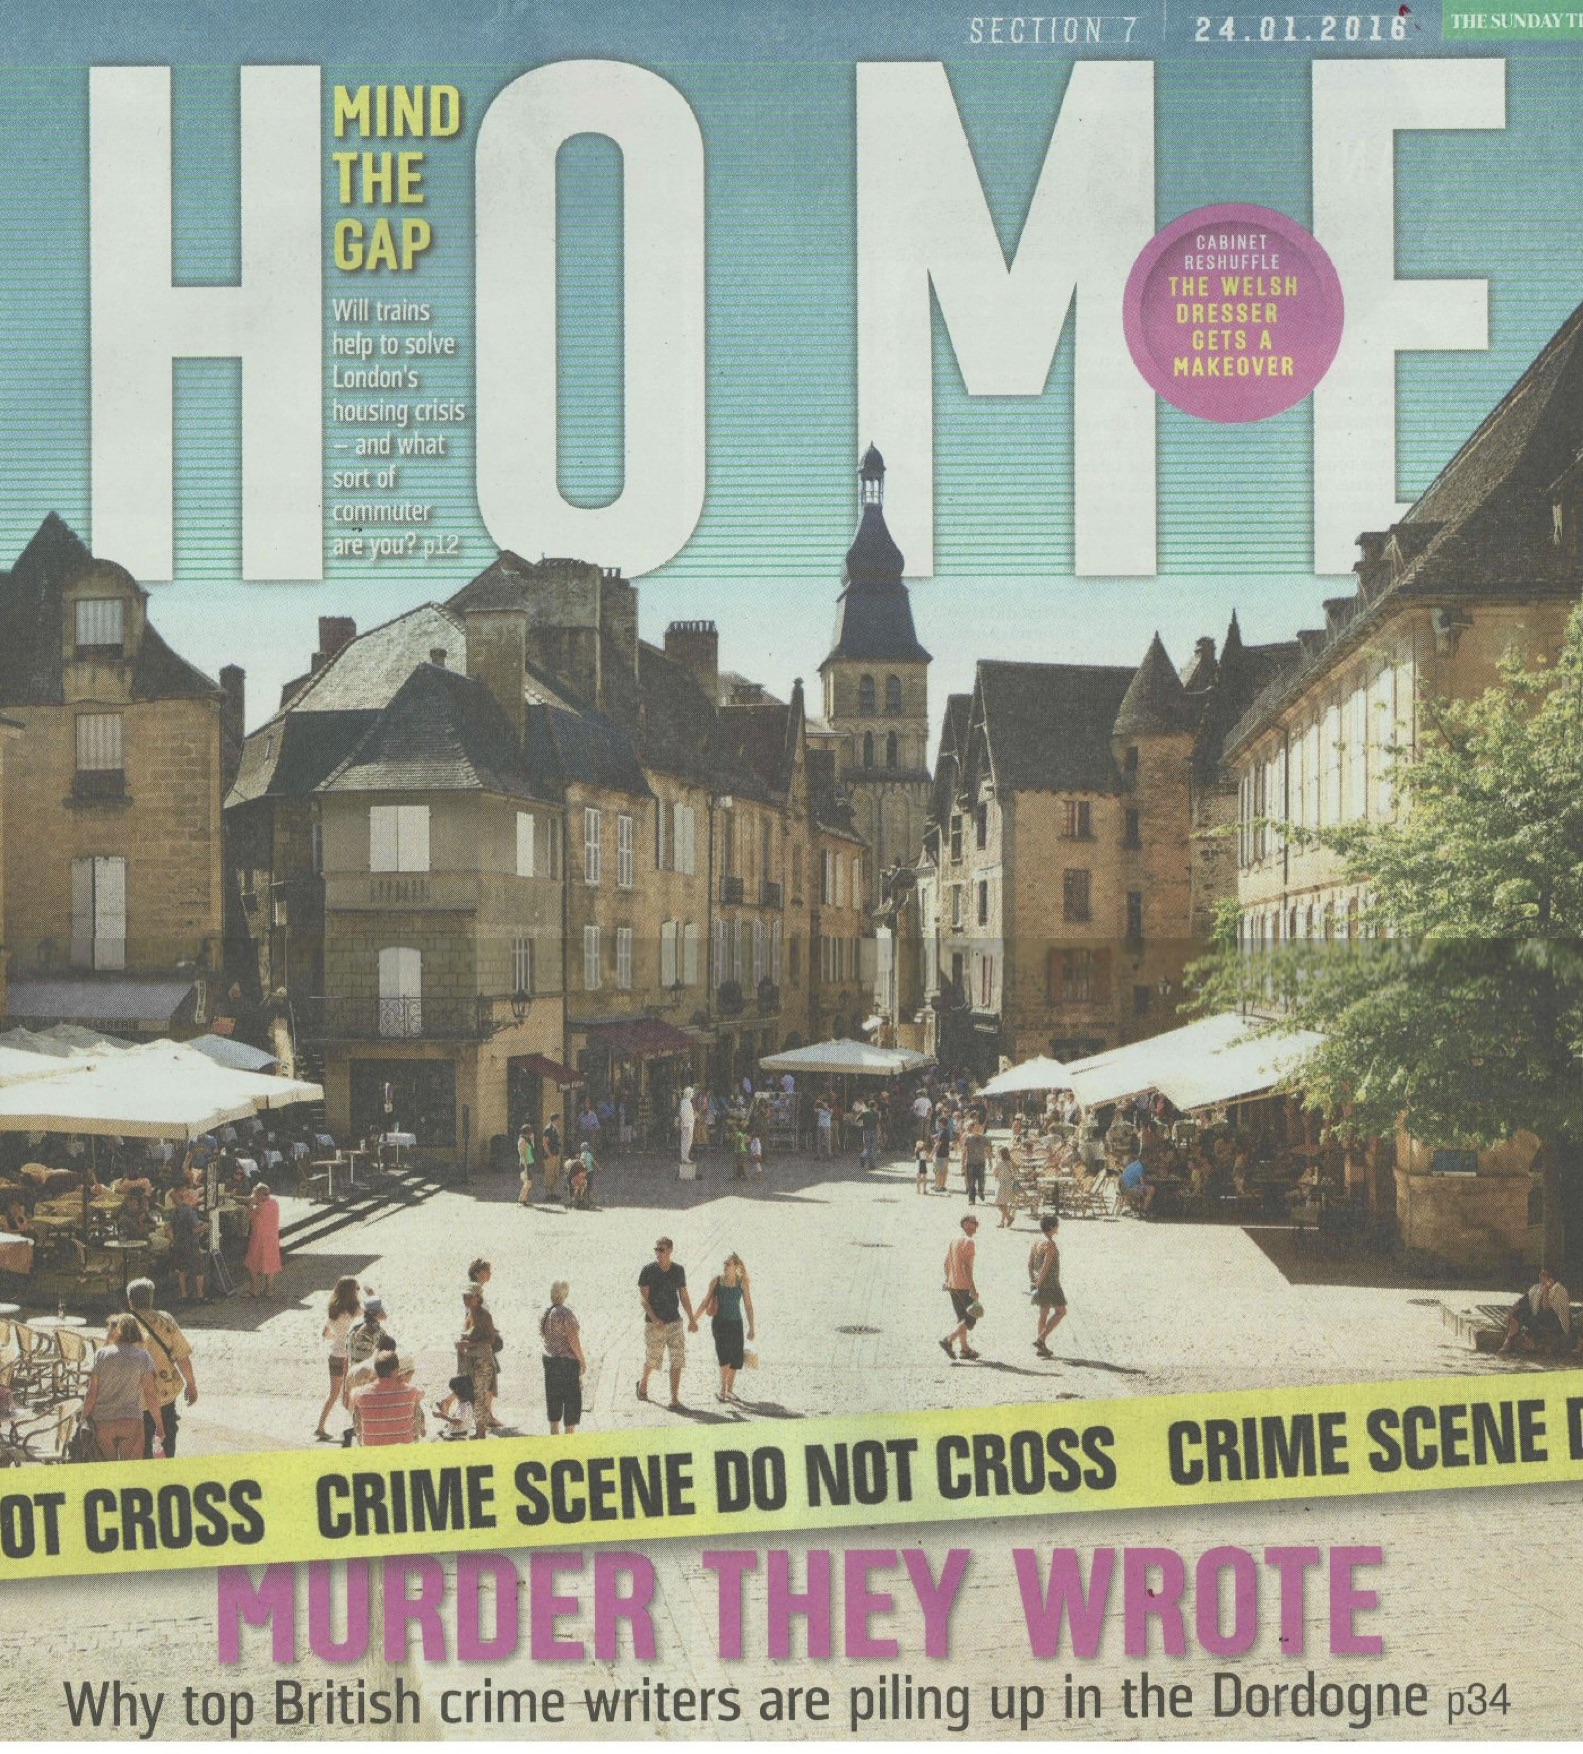 Sunday Times – Murder they wrote… Why top British crime writers are living in the Dordogne